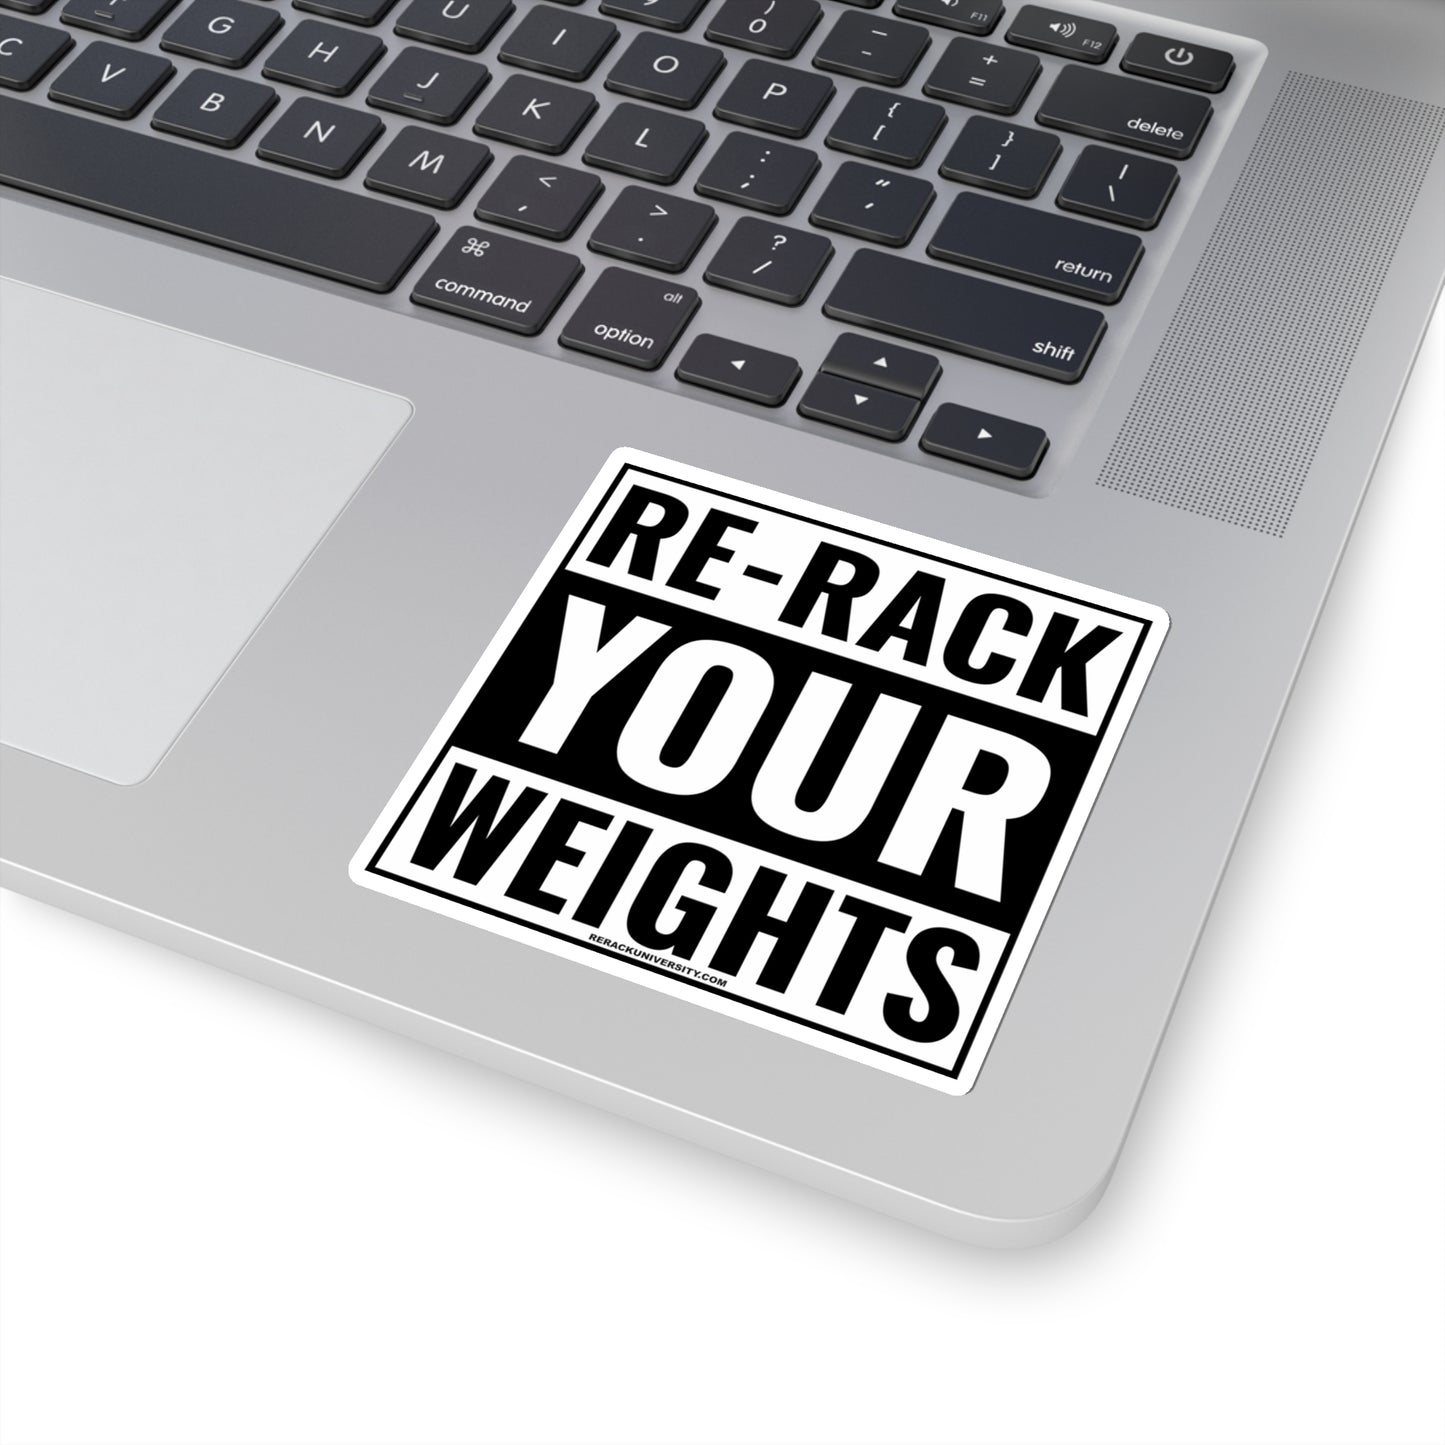 Re-Rack Your Weights Kiss-Cut Stickers